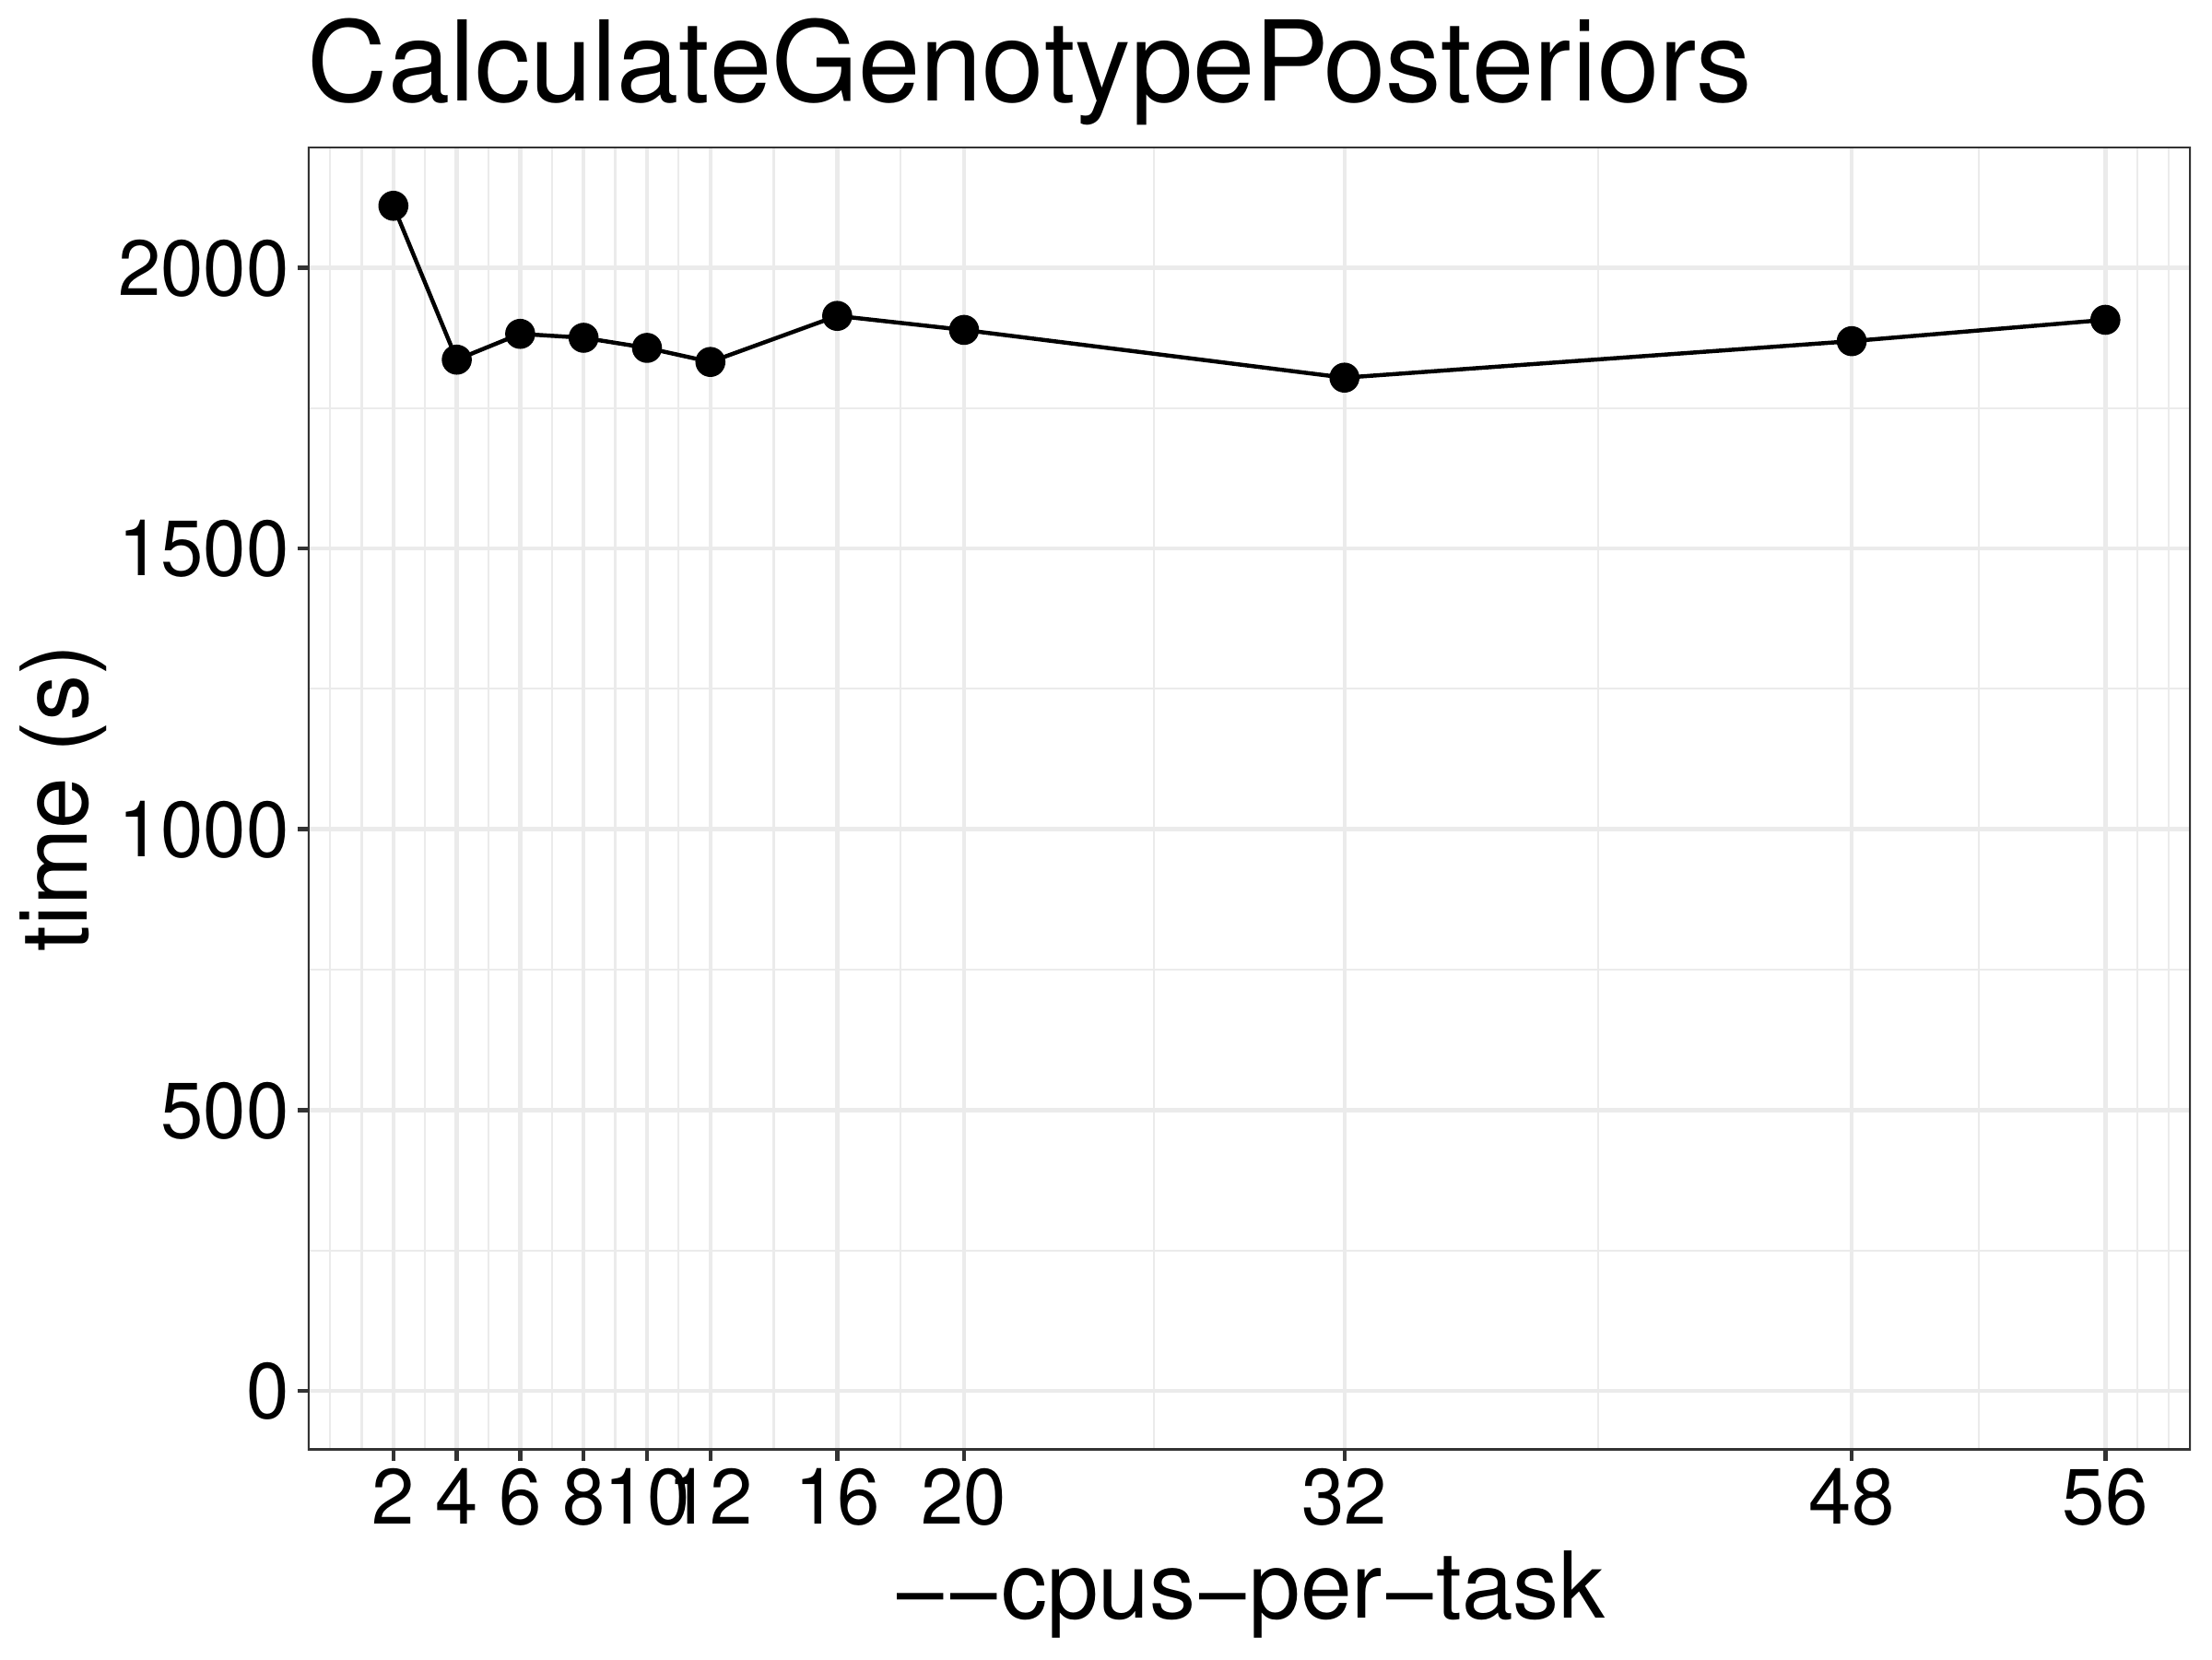 Runtime of CalculateGenotypePosteriors as a function of the number of threads